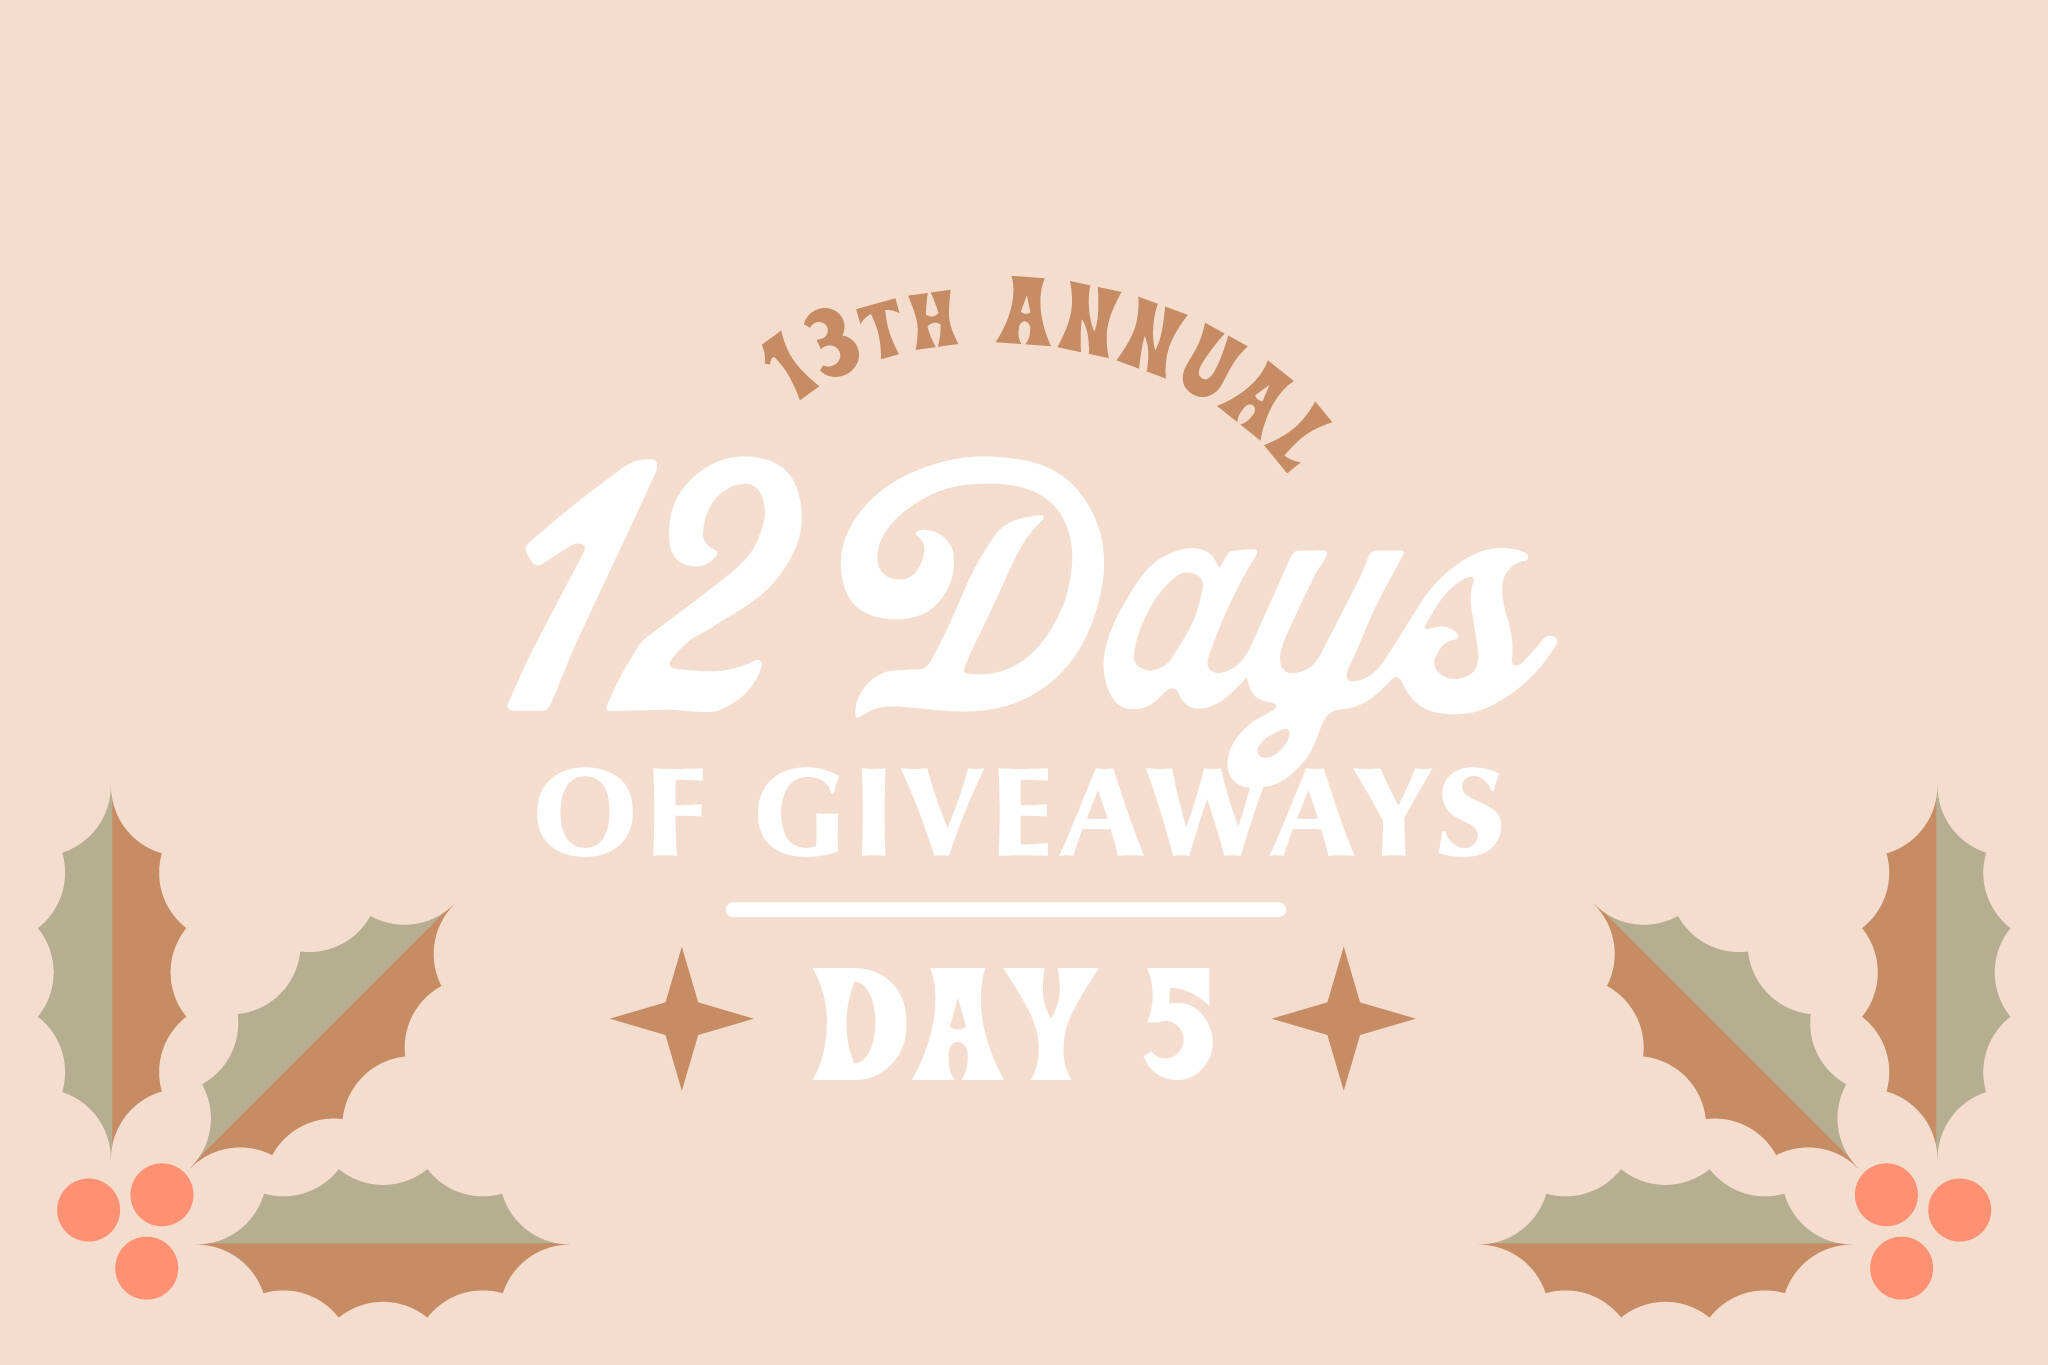 12 days giveaways contest